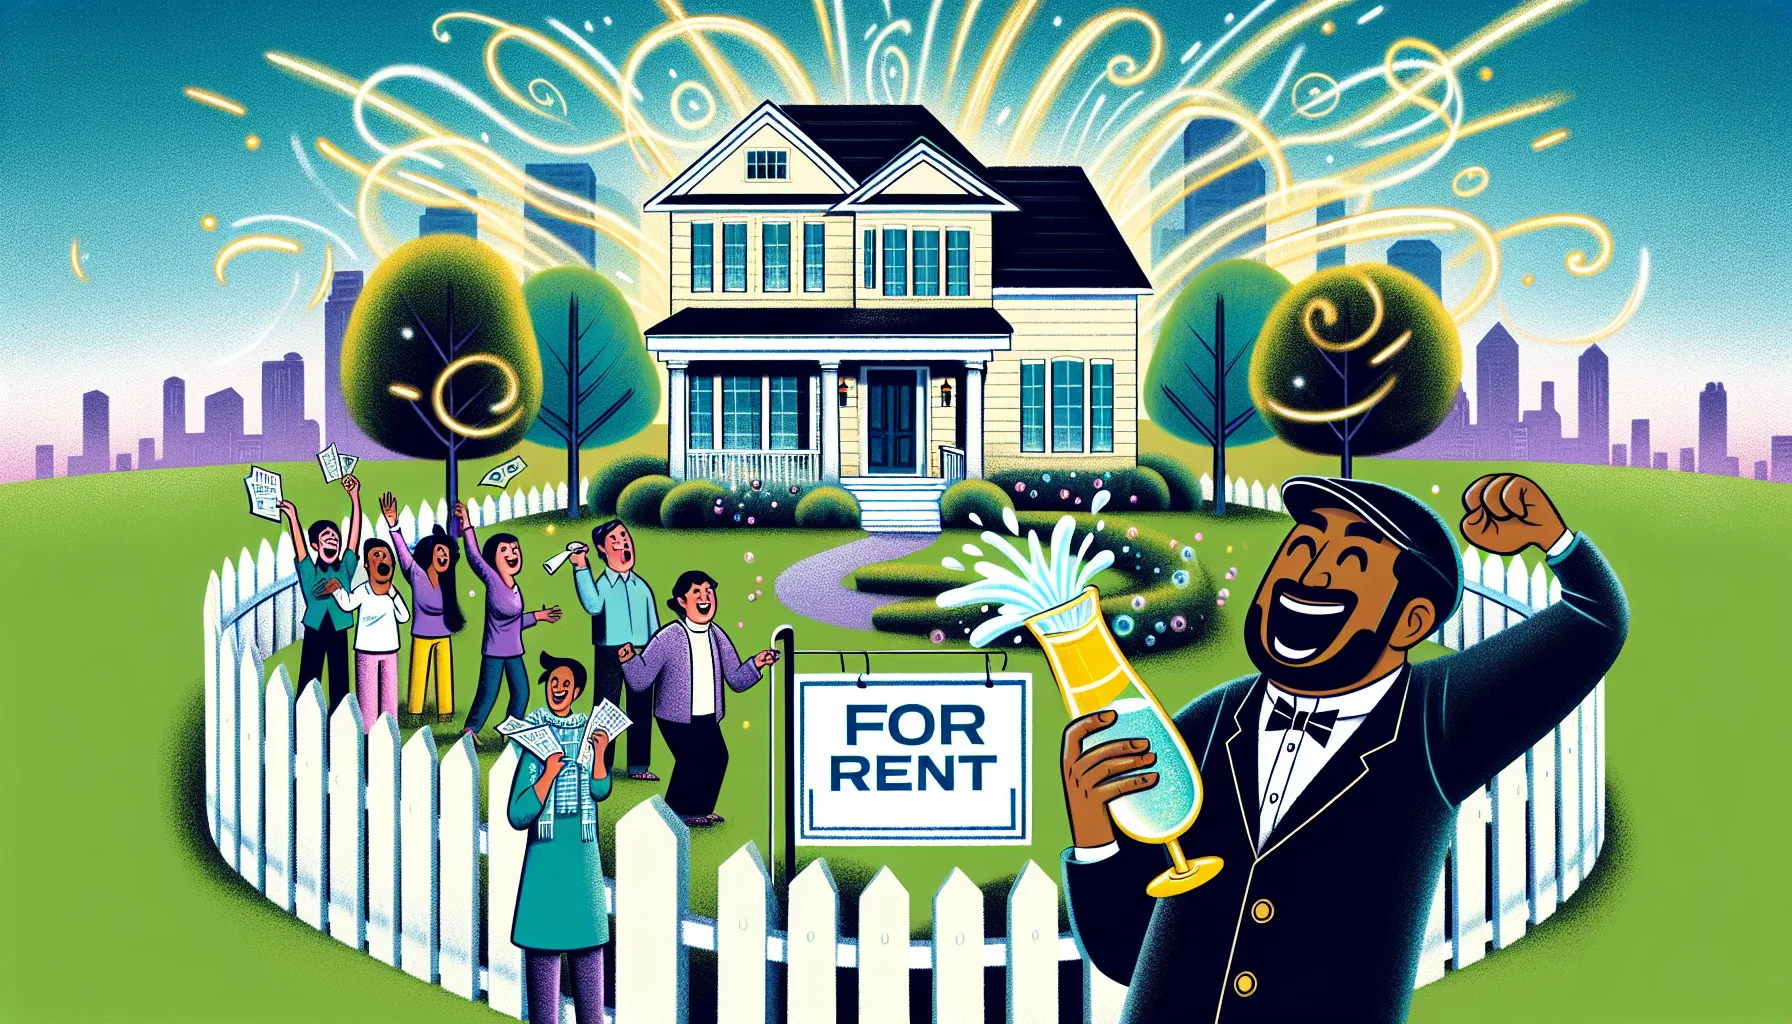 Create a humorous and detailed image depicting a perfect real estate scenario. The scene should involve a jubilant individual of Hispanic descent buying a beautiful, sprawling suburban house with a lush green lawn and freshly painted white picket fence. Nearby, there is a real estate agent of South Asian descent celebrating the sale by popping a champagne cork. The new homeowner is happily visualizing a 'For Rent' sign in the front yard. A dynamic, cartoonish speed line effect indicates imagined renters of varying descents (Caucasian, Black, Middle-Eastern, White) and genders lining up to pay their rent in advance.